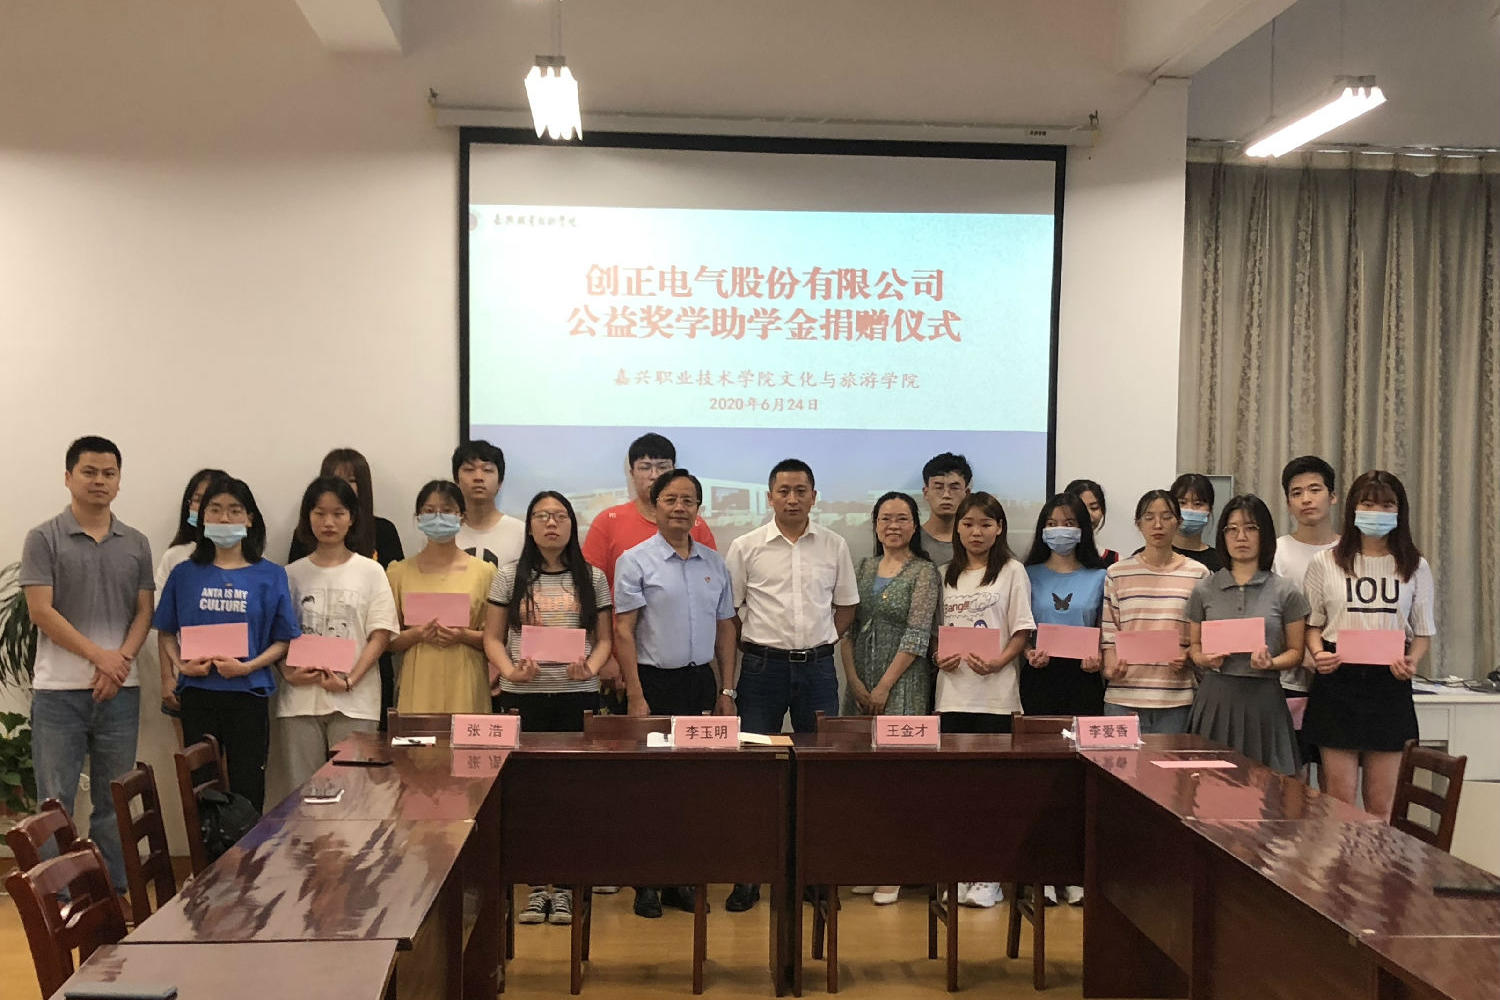 The donation ceremony of Chuangzheng Electric Co., Ltd. charity awards and bursaries was held in Jia Vocational College